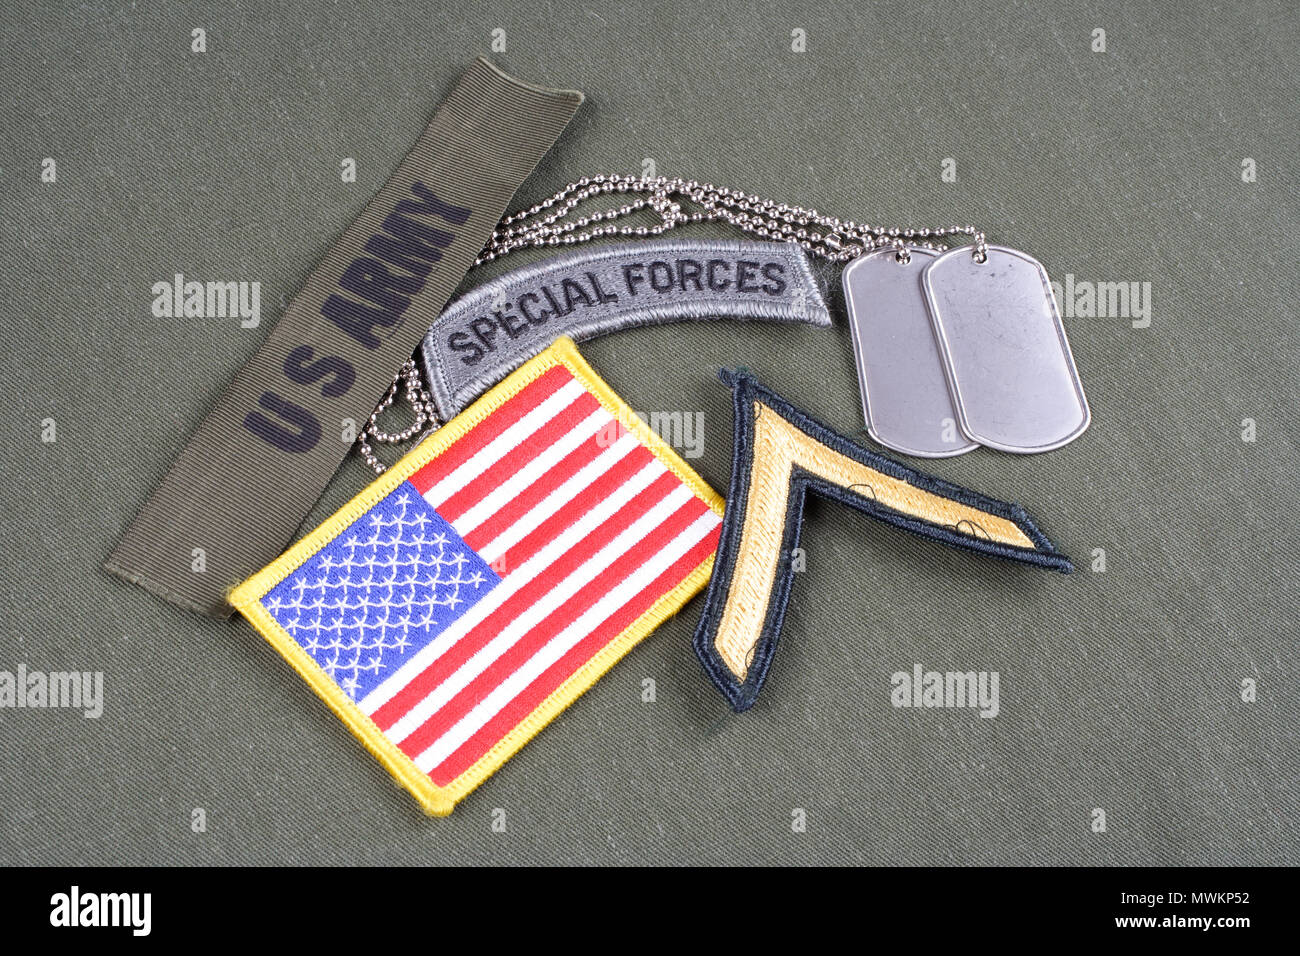 KIEV, UKRAINE - August 21, 2015. US ARMY special forces insignia on olive green uniform Stock Photo